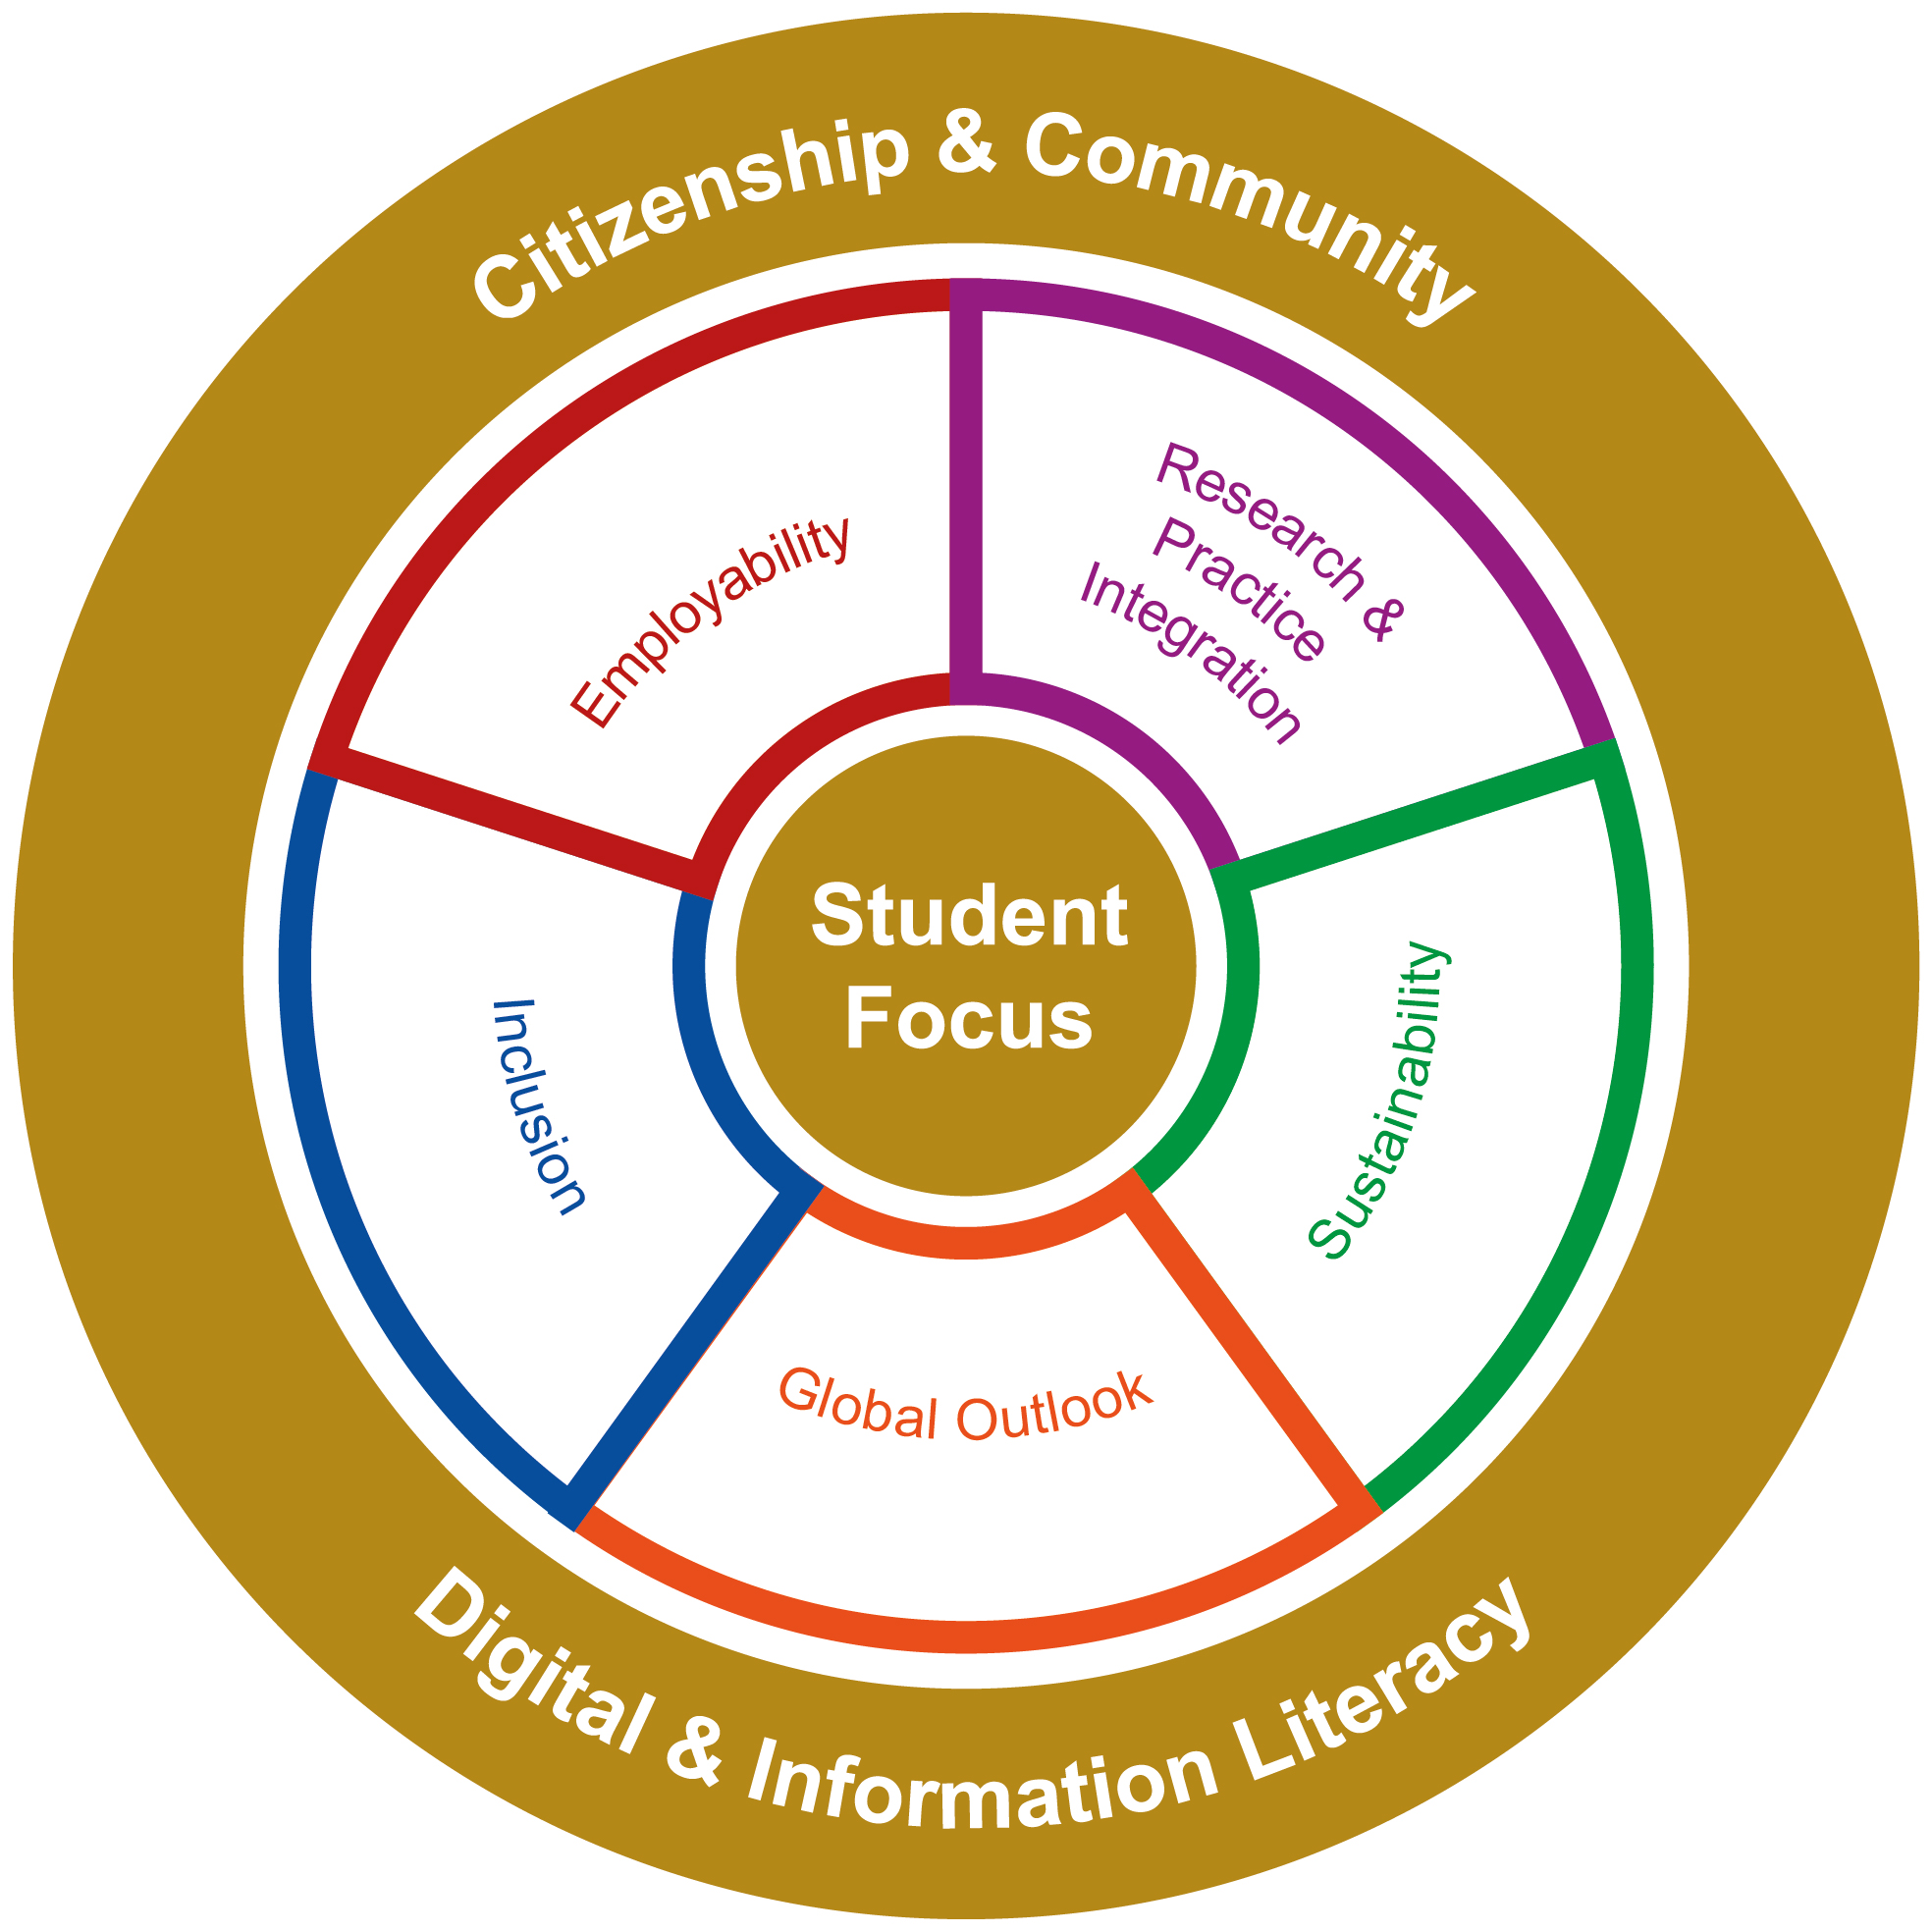  Gold Standard Curriculum framework’s five main themes – Employability; Global Focus; Inclusion; Sustainability; and Research- and Practice-Integration – with the two cross-cutting themes: digital and information literacy; and community and citizenship